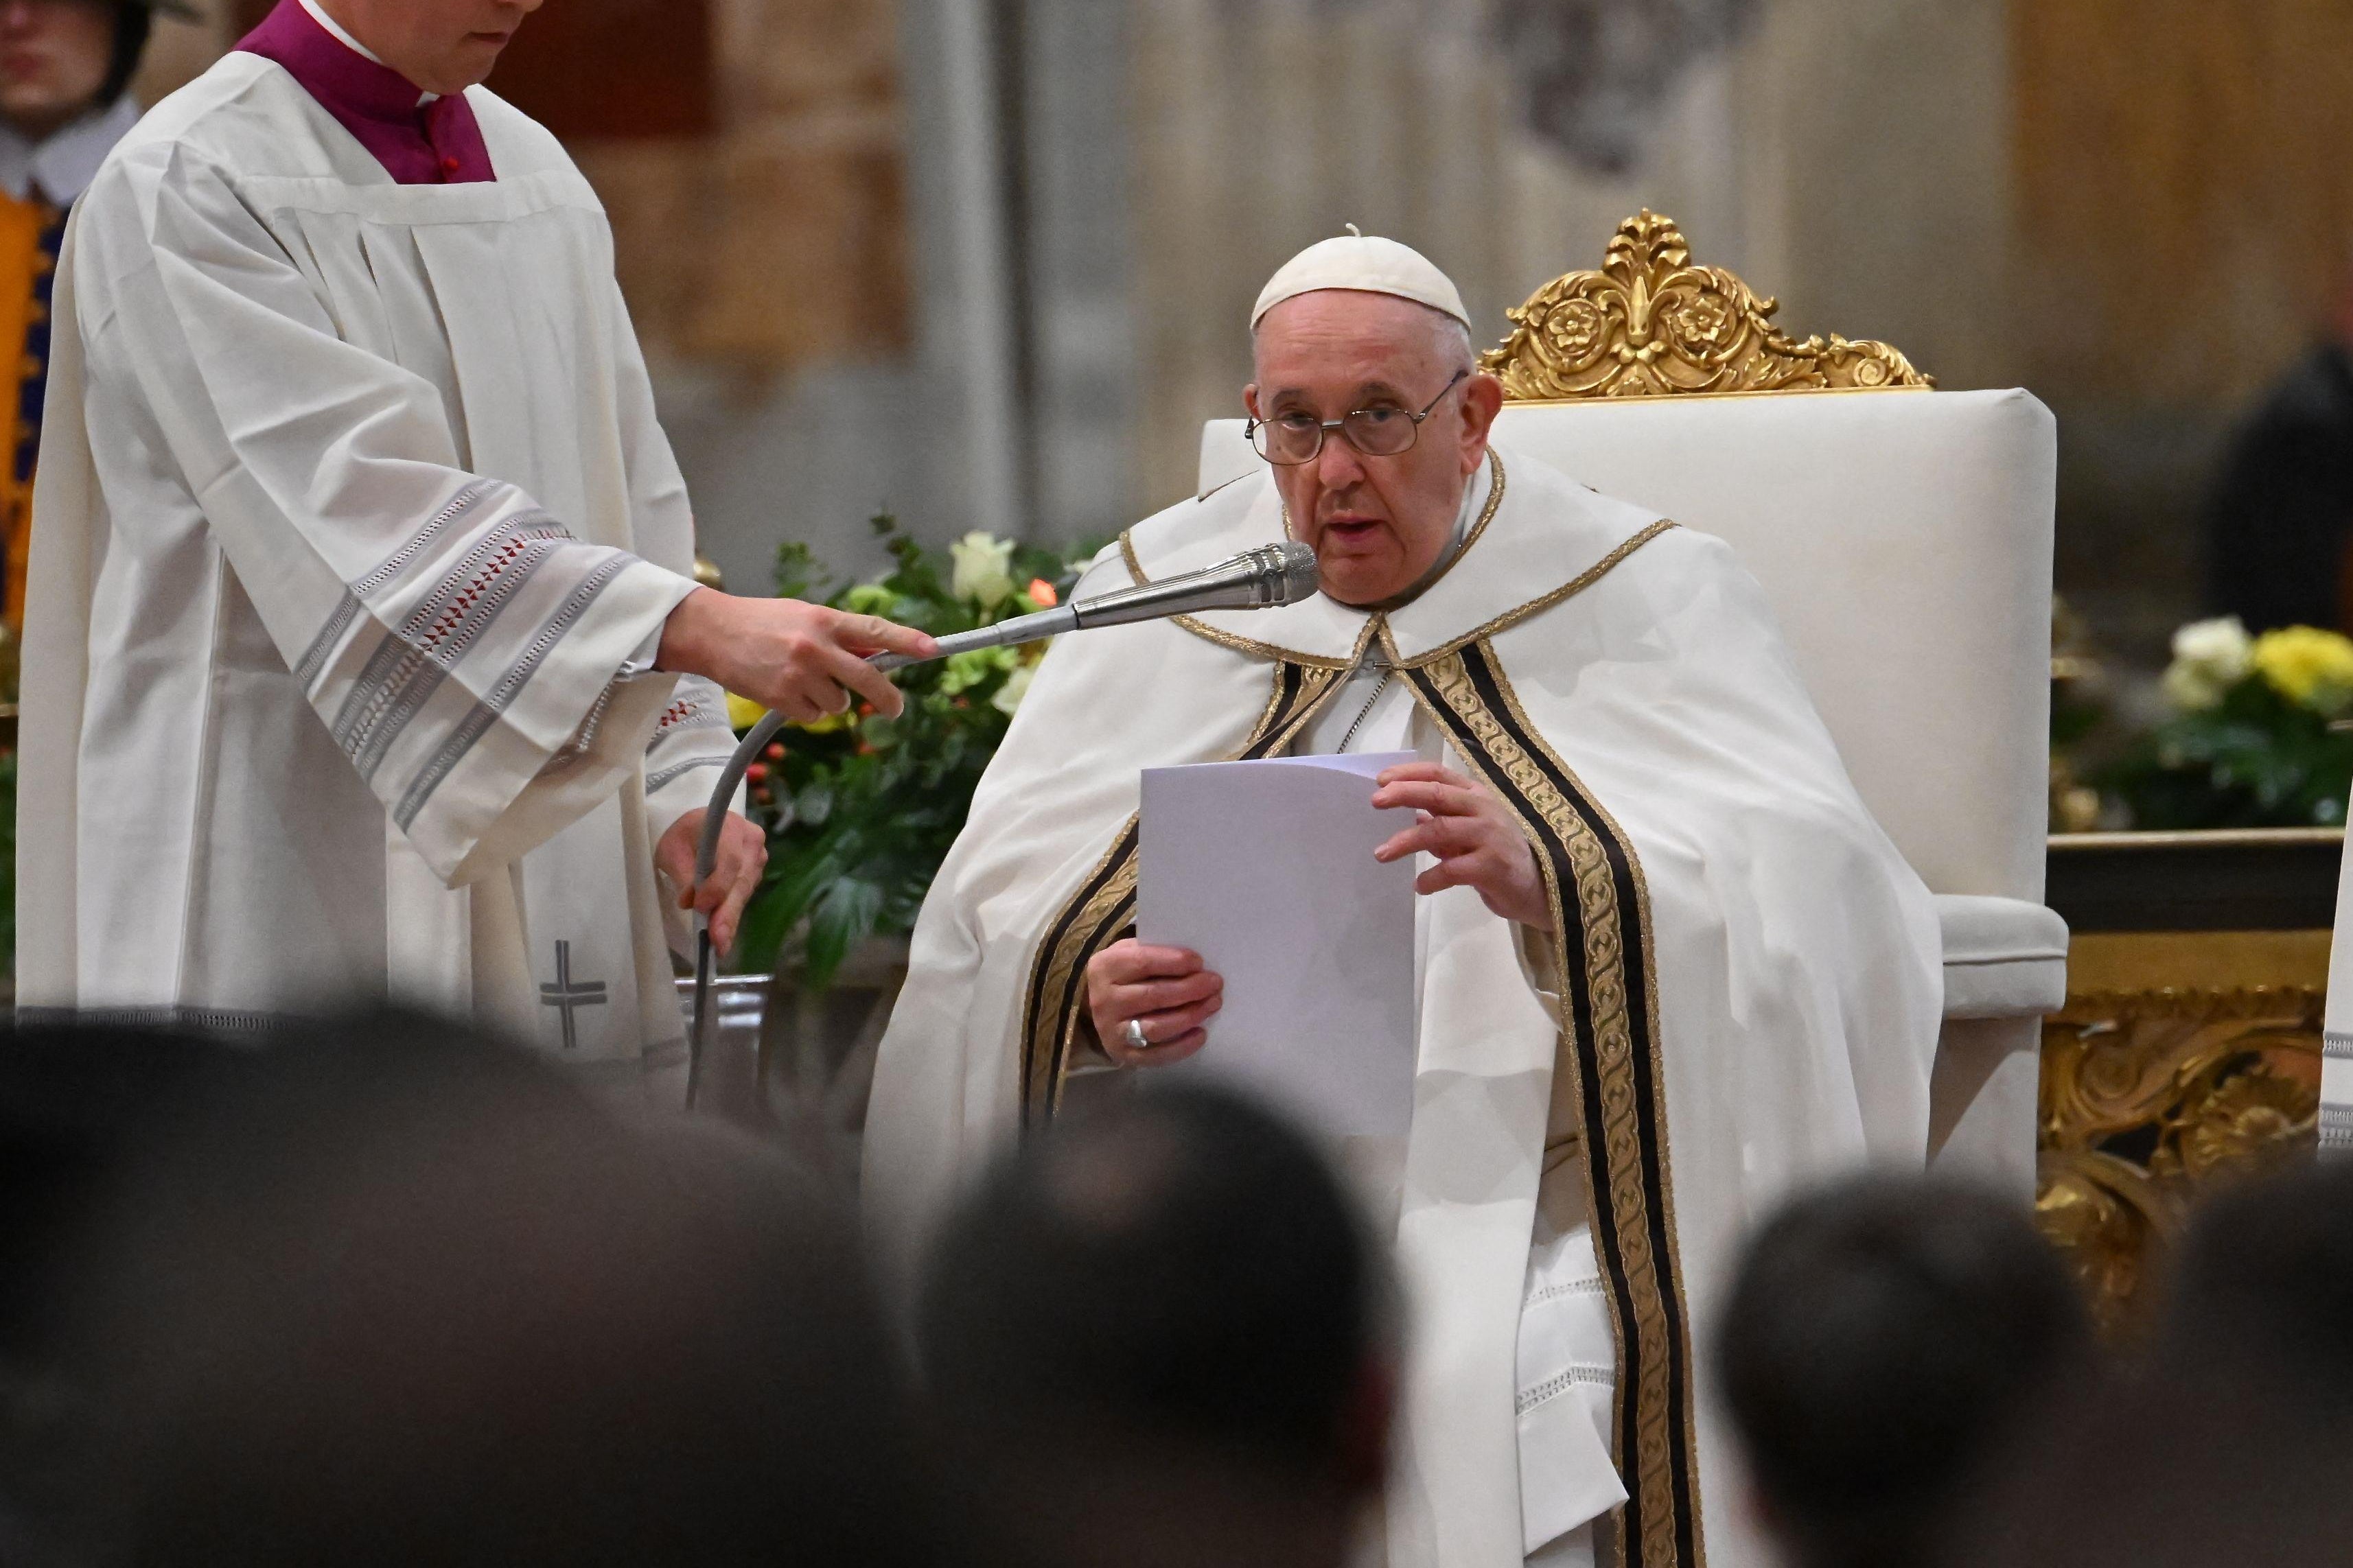 The pope, wearing white garments with black and gold trim and holding papers to read off, sits in a white chair with ornate gold trim and speaks into a microphone held by a man standing next to him. 